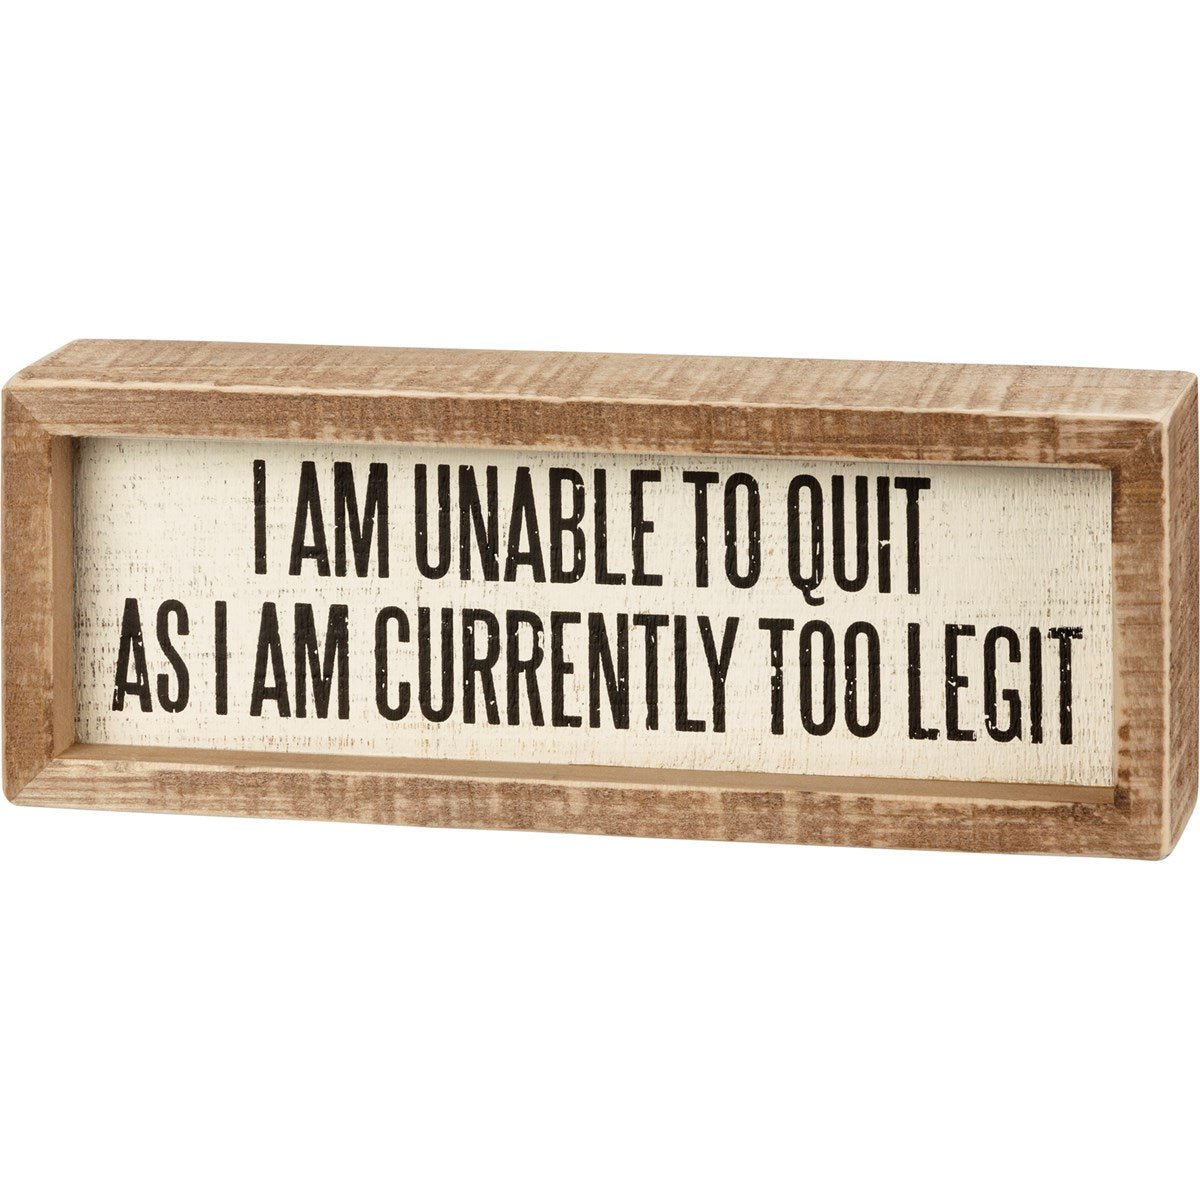 Currently Too Legit Inset Wooden Box Sign | 8" x 3" Funny Quote Art